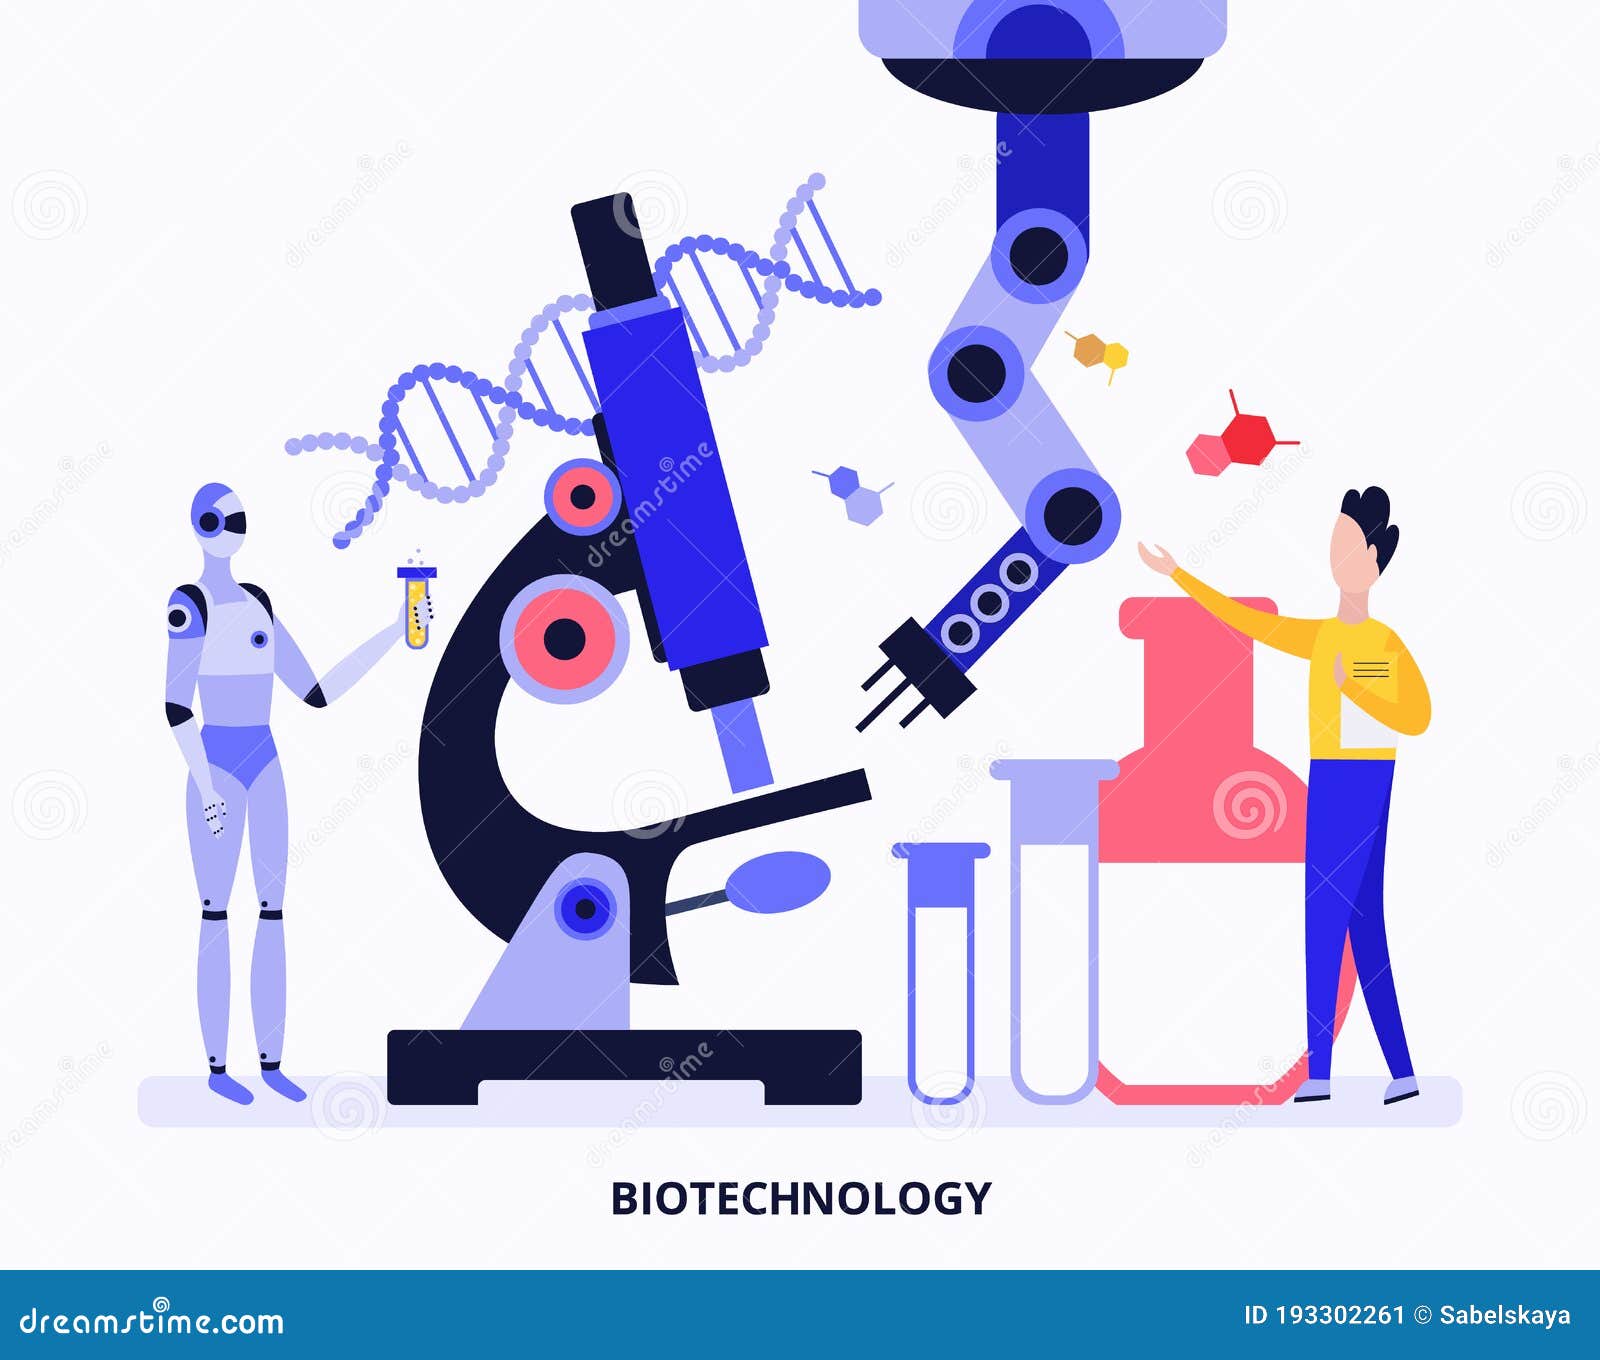 Biotechnology Lab Banner with Cartoon Robot and Scientist Stock Vector